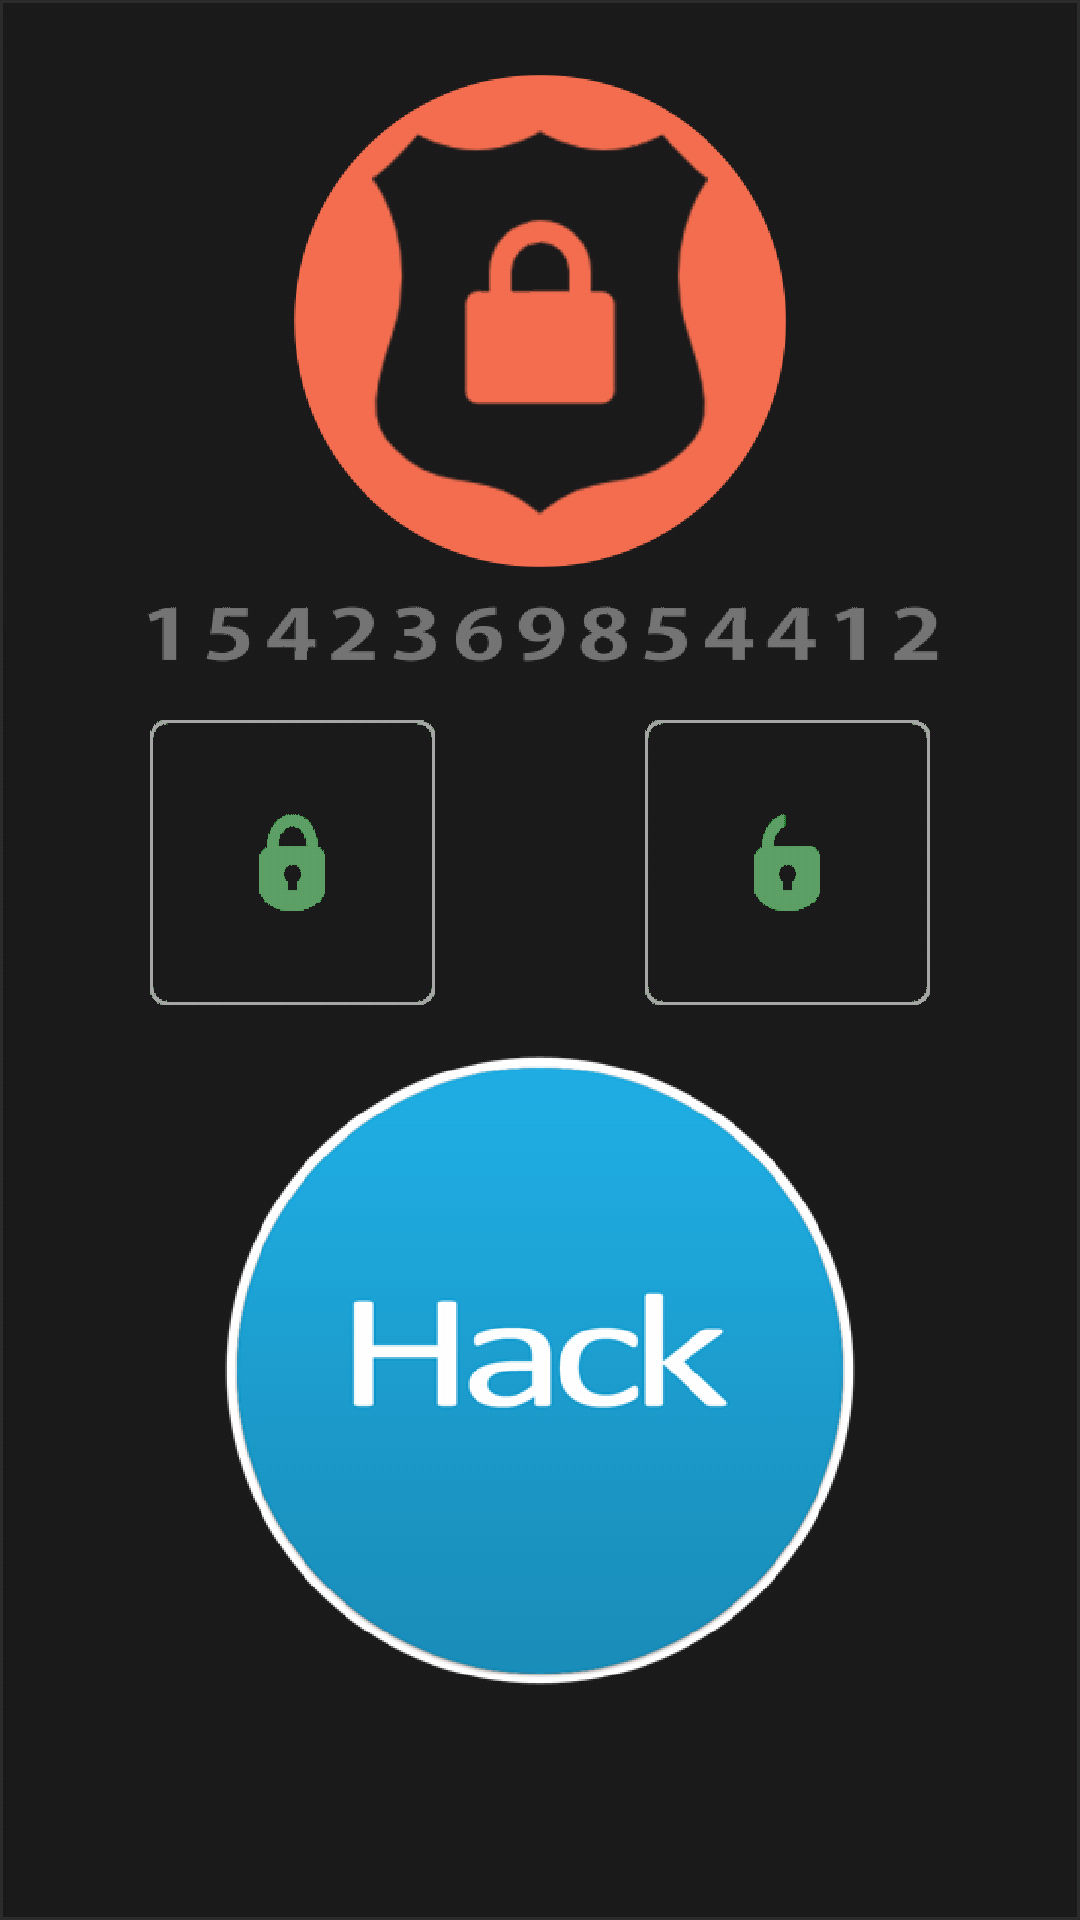 Simulador Hacking for Android - APK Download - 